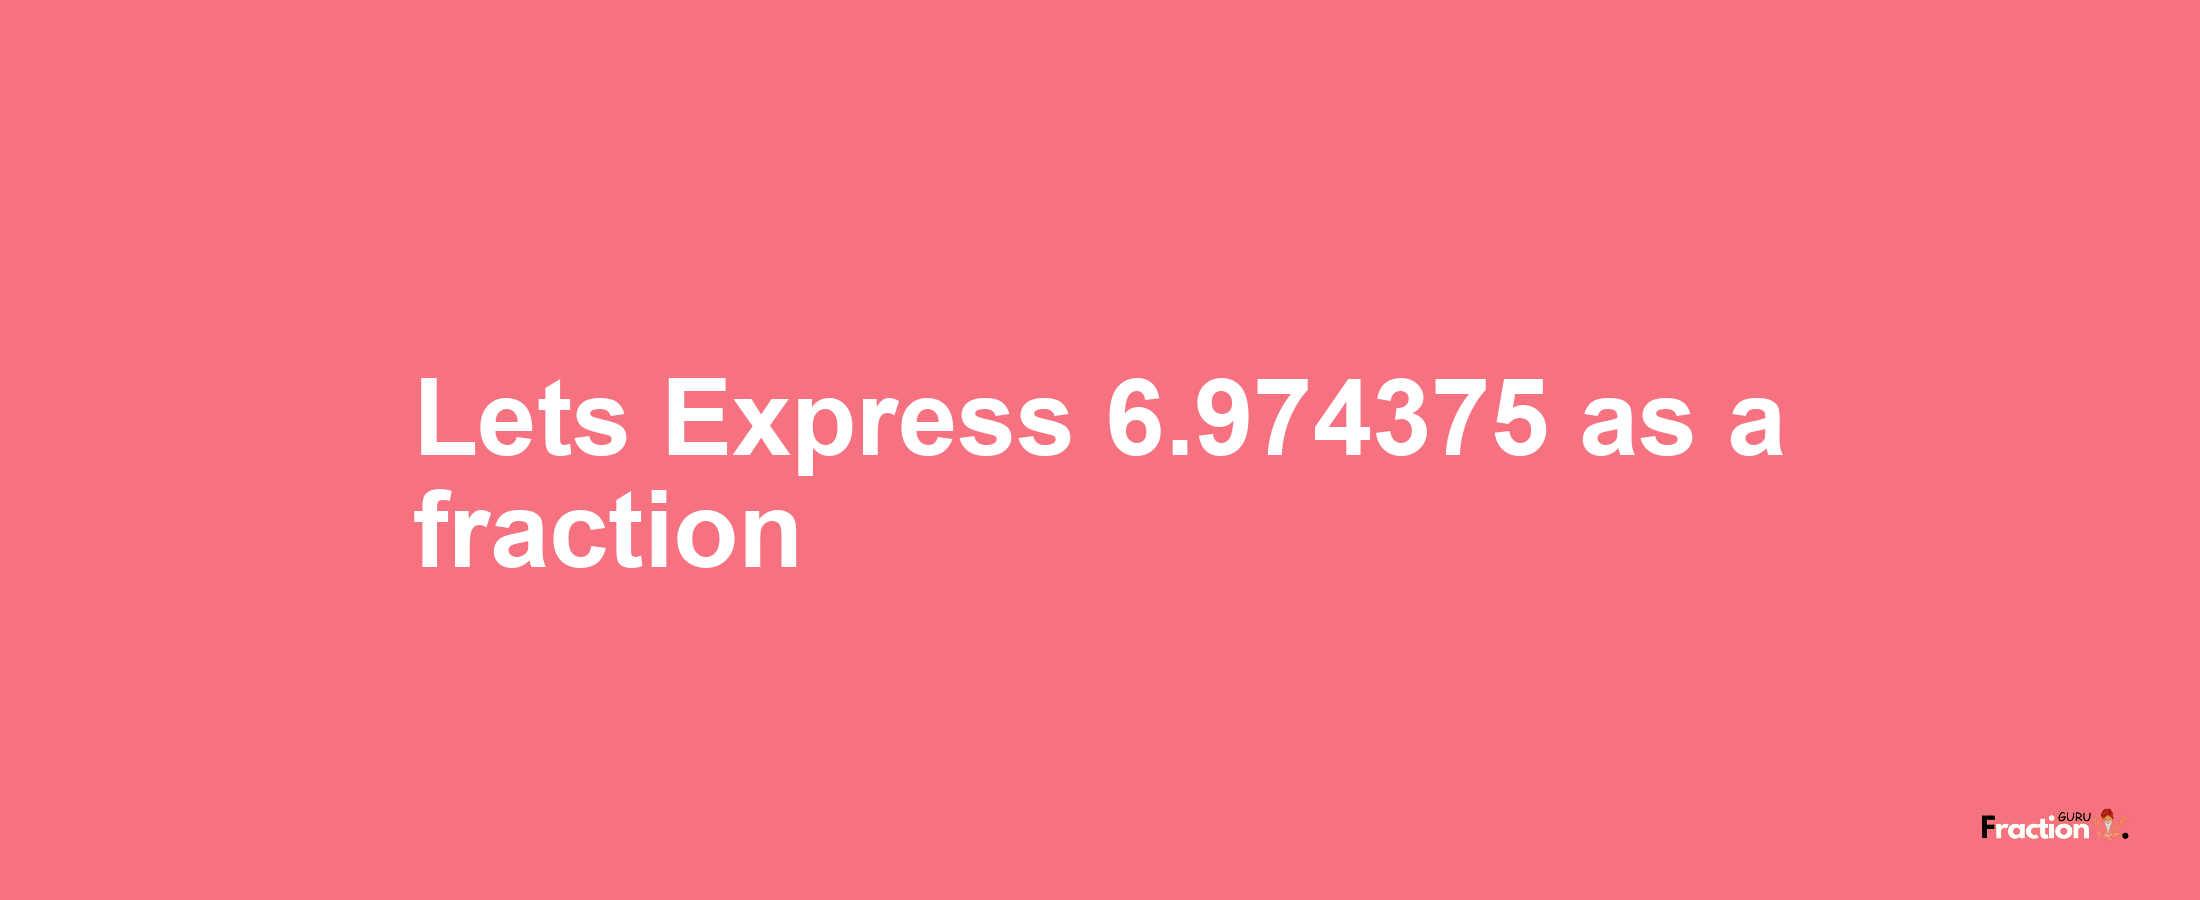 Lets Express 6.974375 as afraction